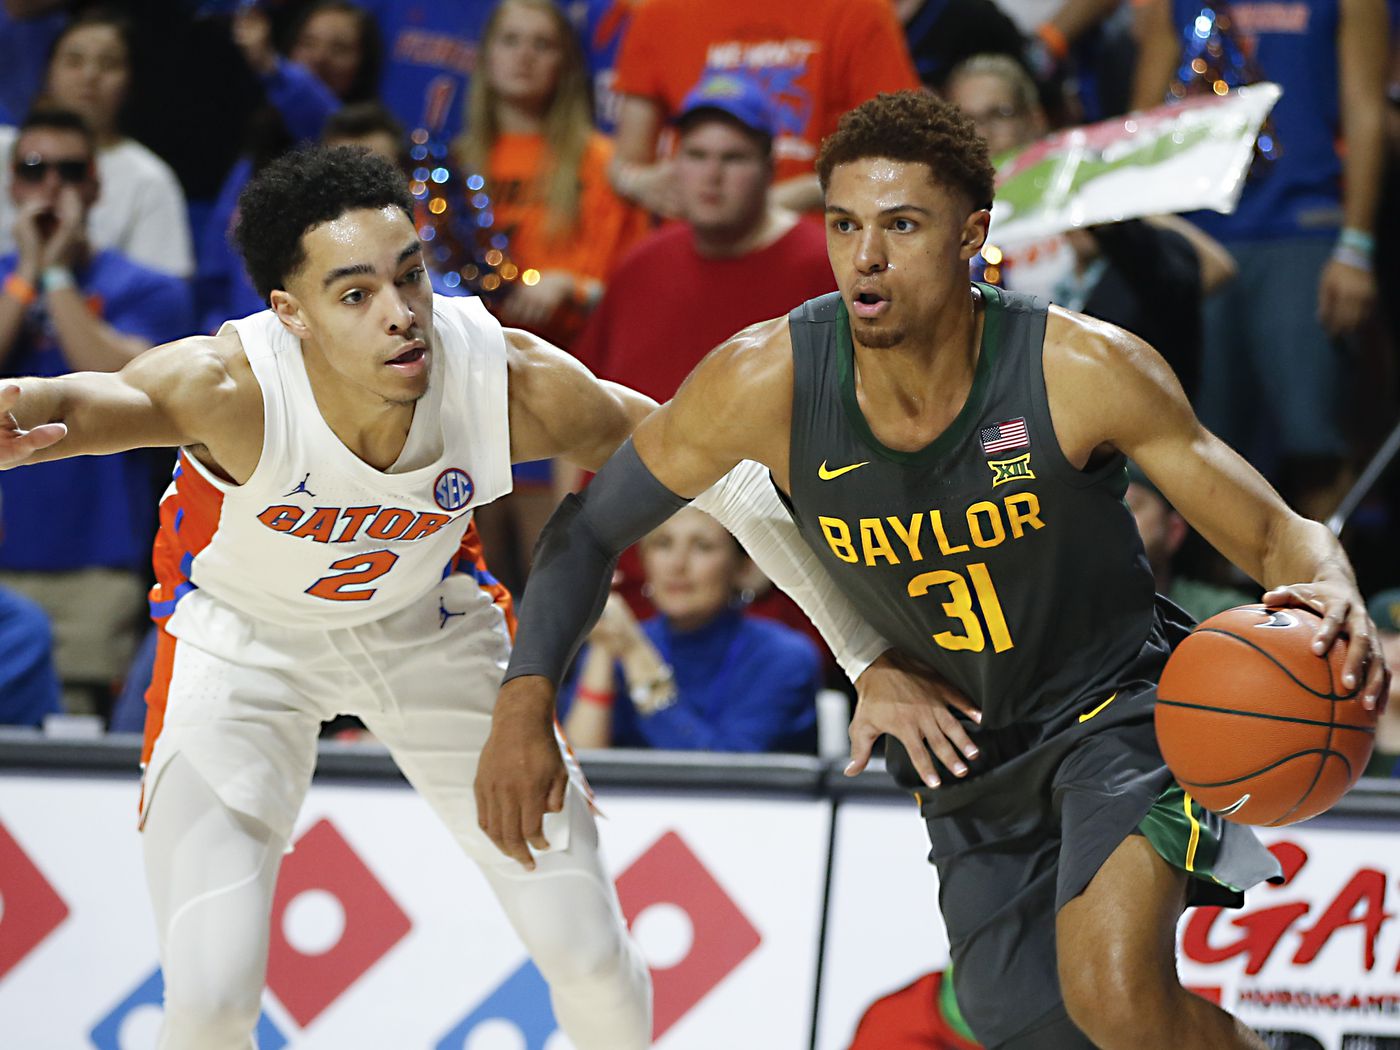 College Basketball NCAA Tournament Bracketology Seed List For January 28, 2020 - Blogging the Bracket